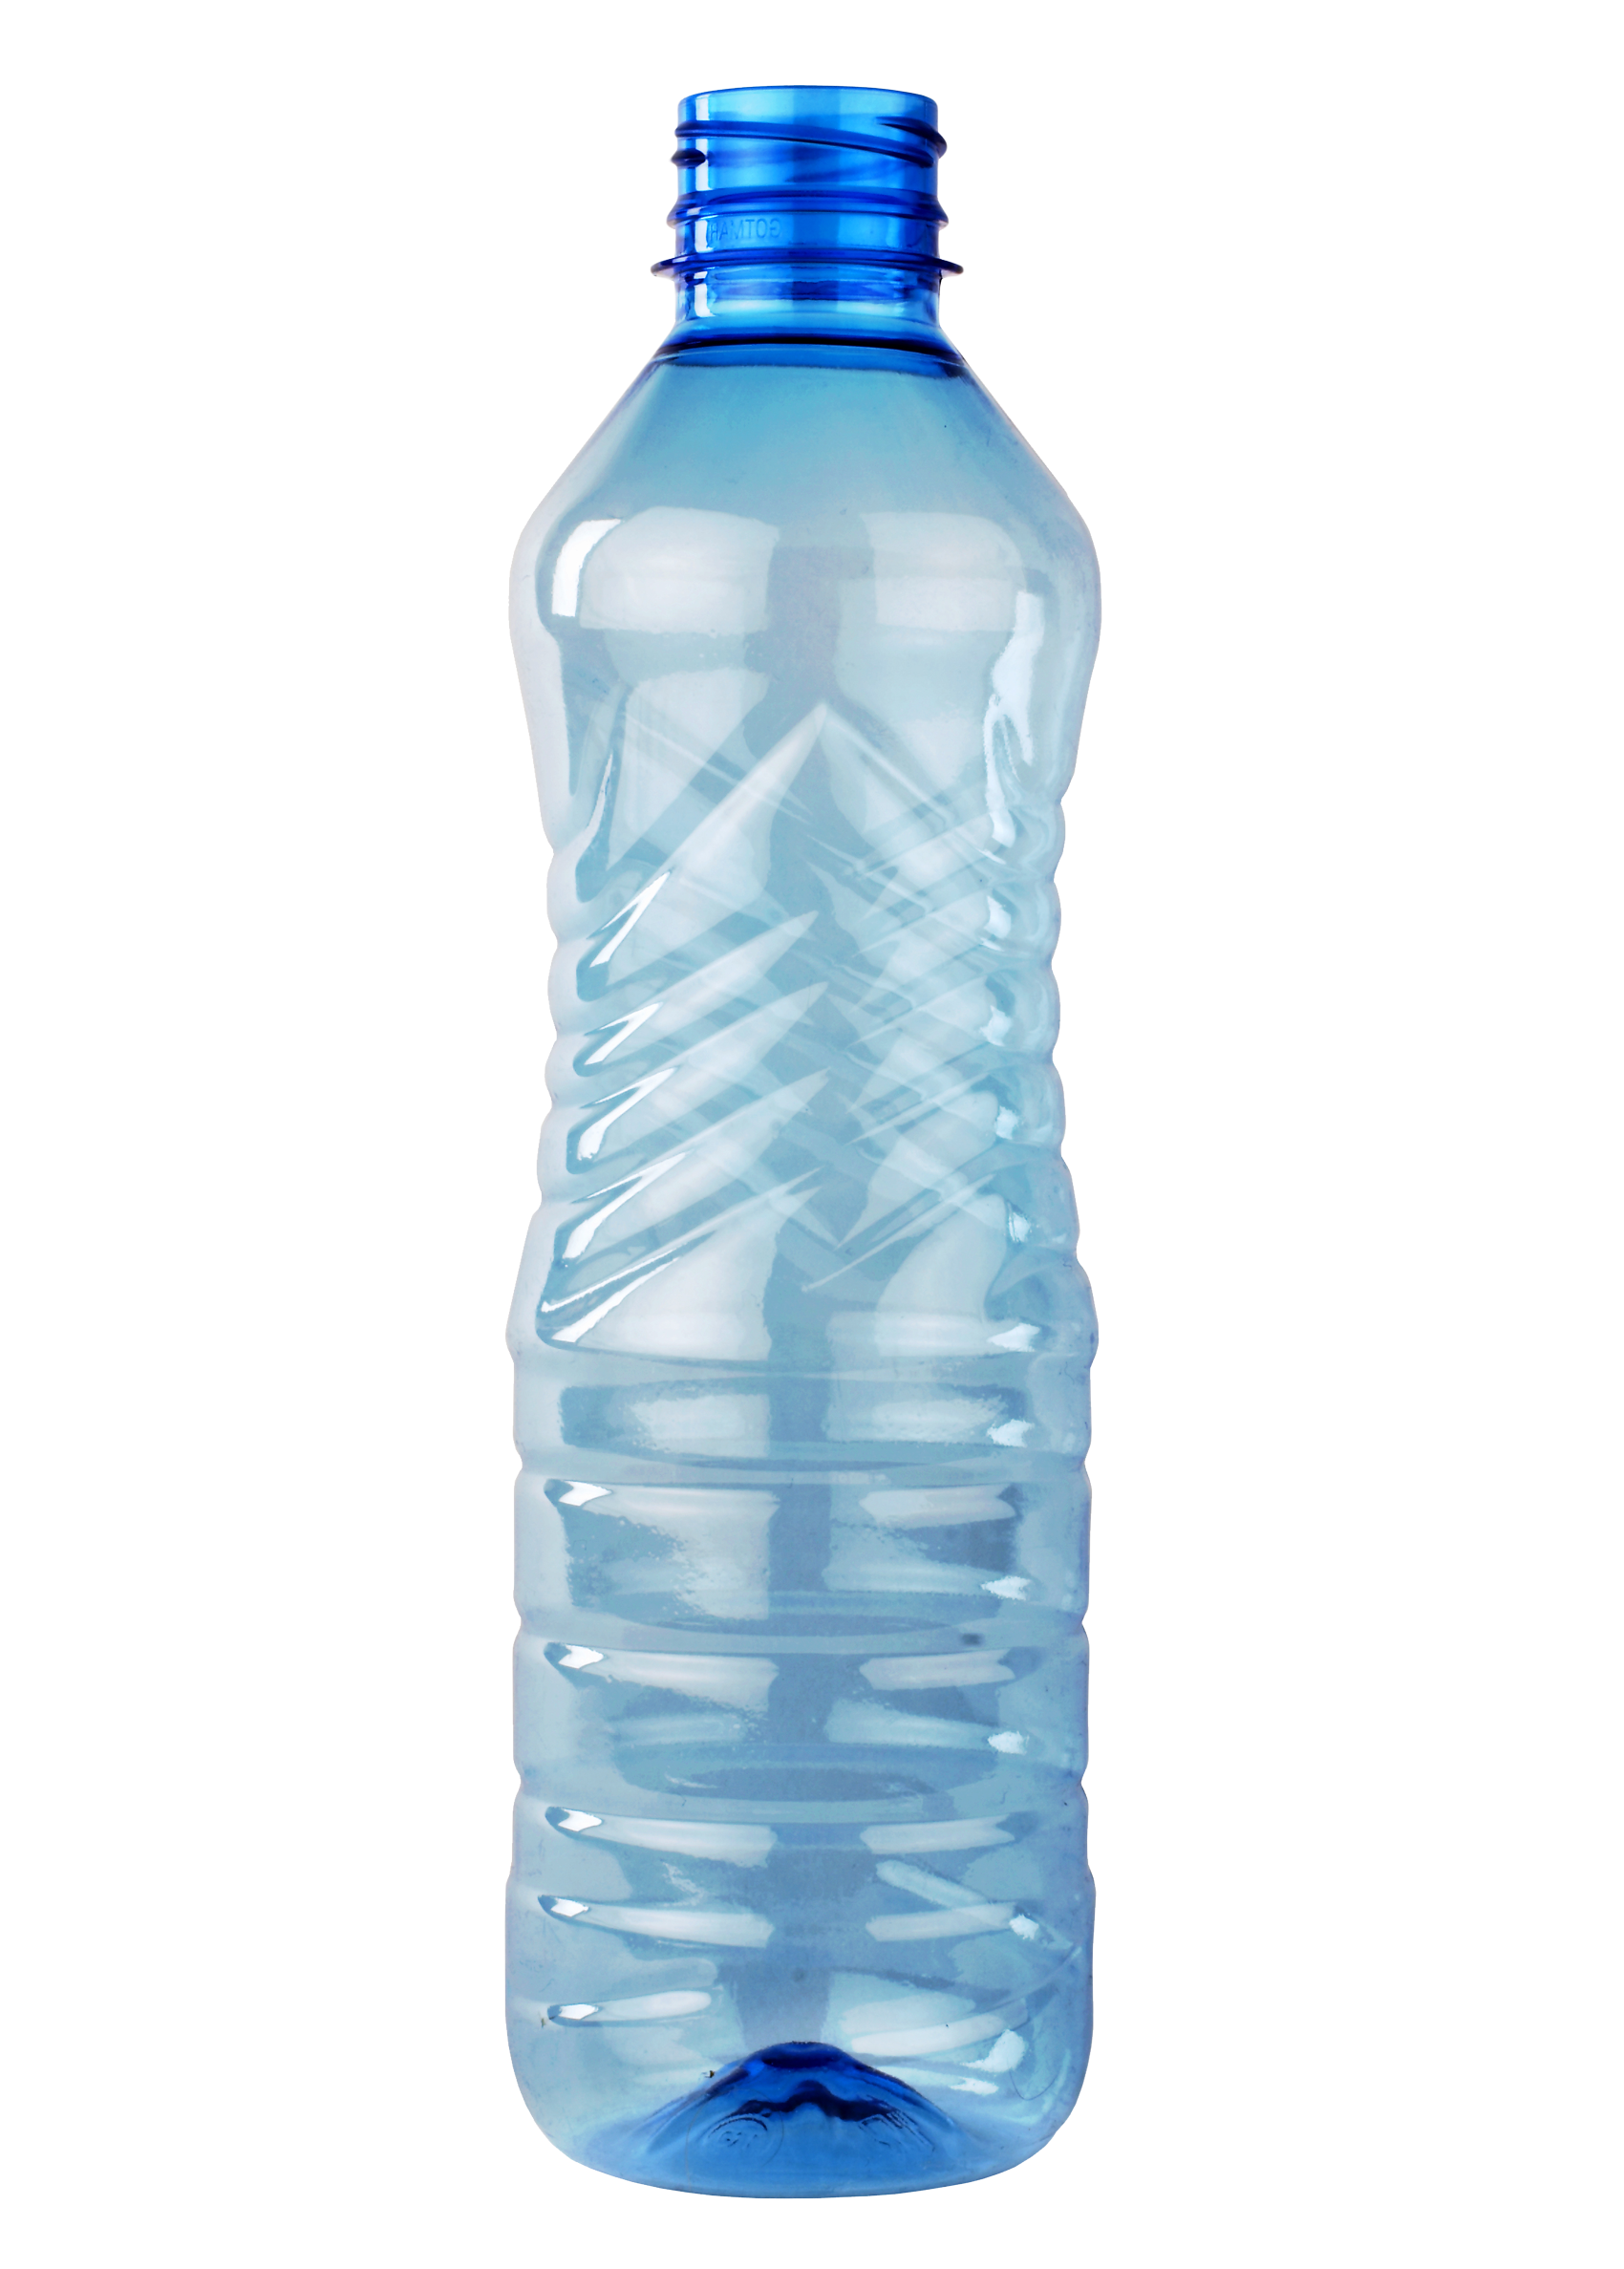 Transparent pictures free icons. Water bottle png